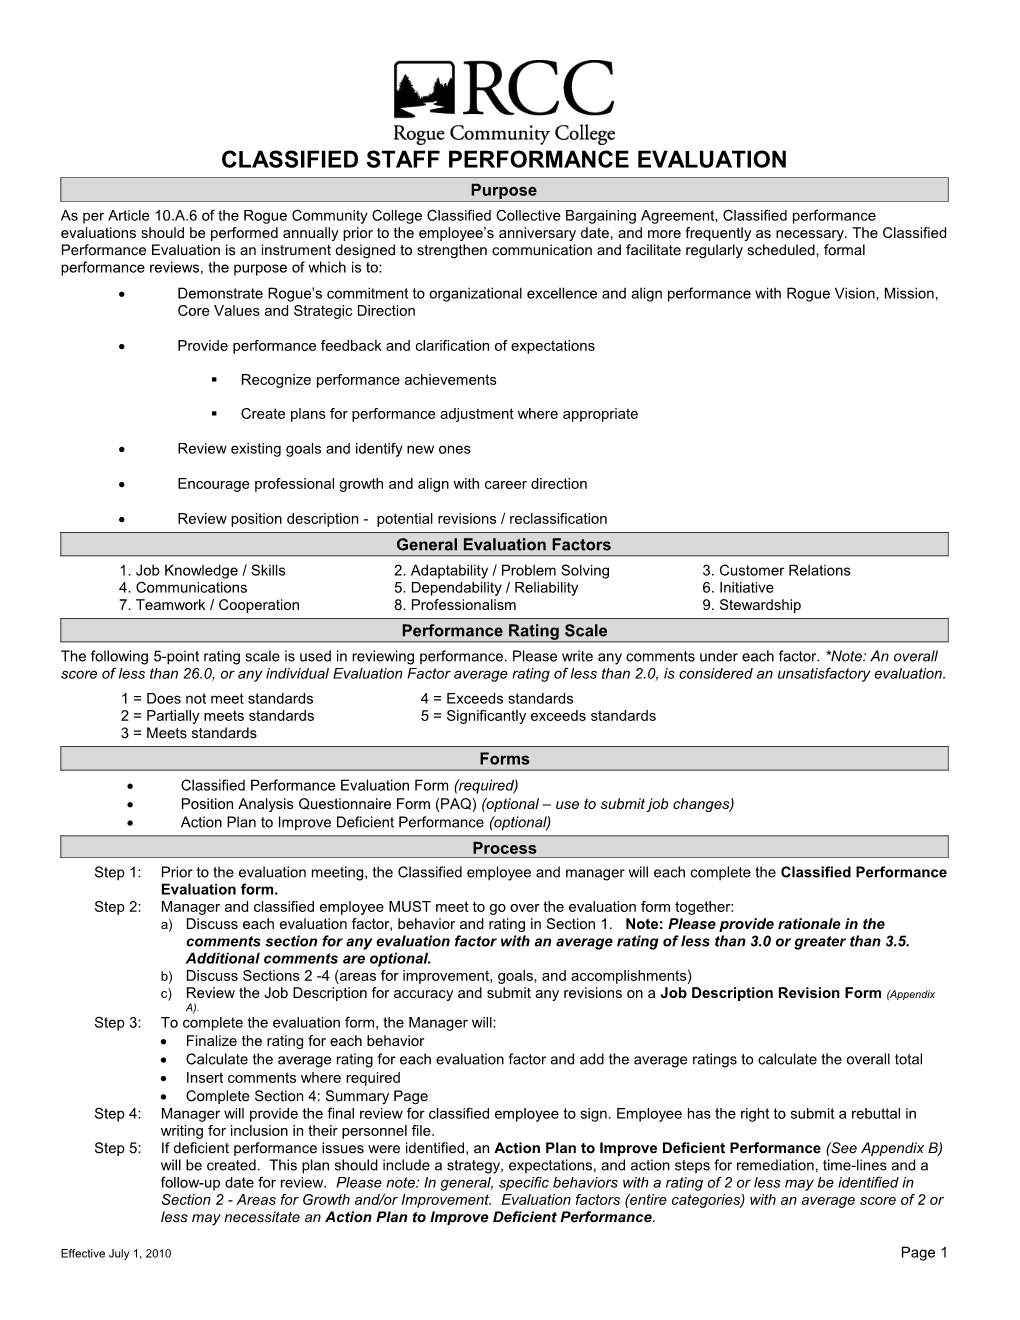 Classified Staff Performance Evaluation